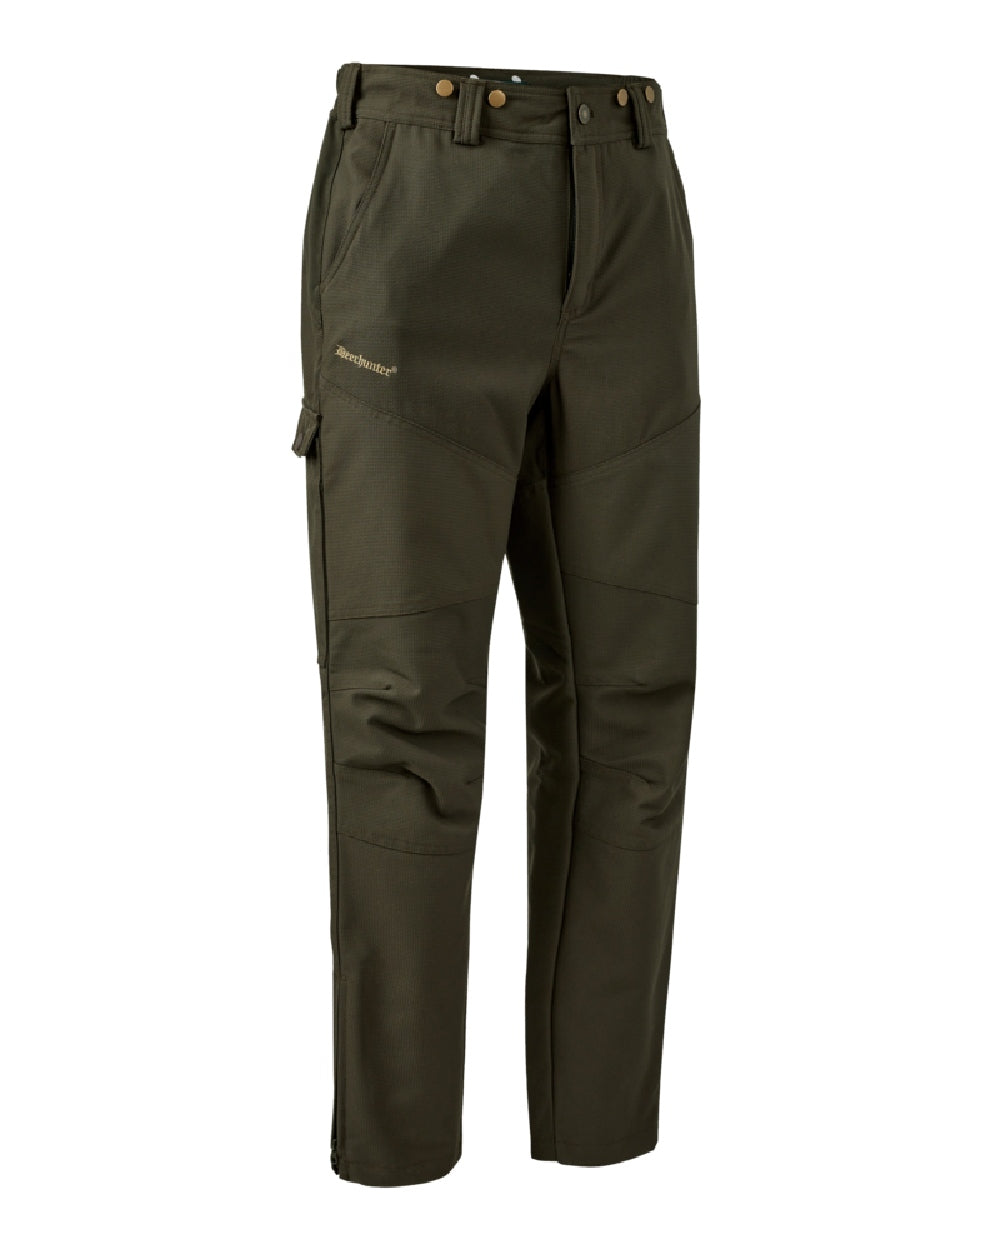  Deerhunter Strike Extreme Boot Trousers in Palm Green